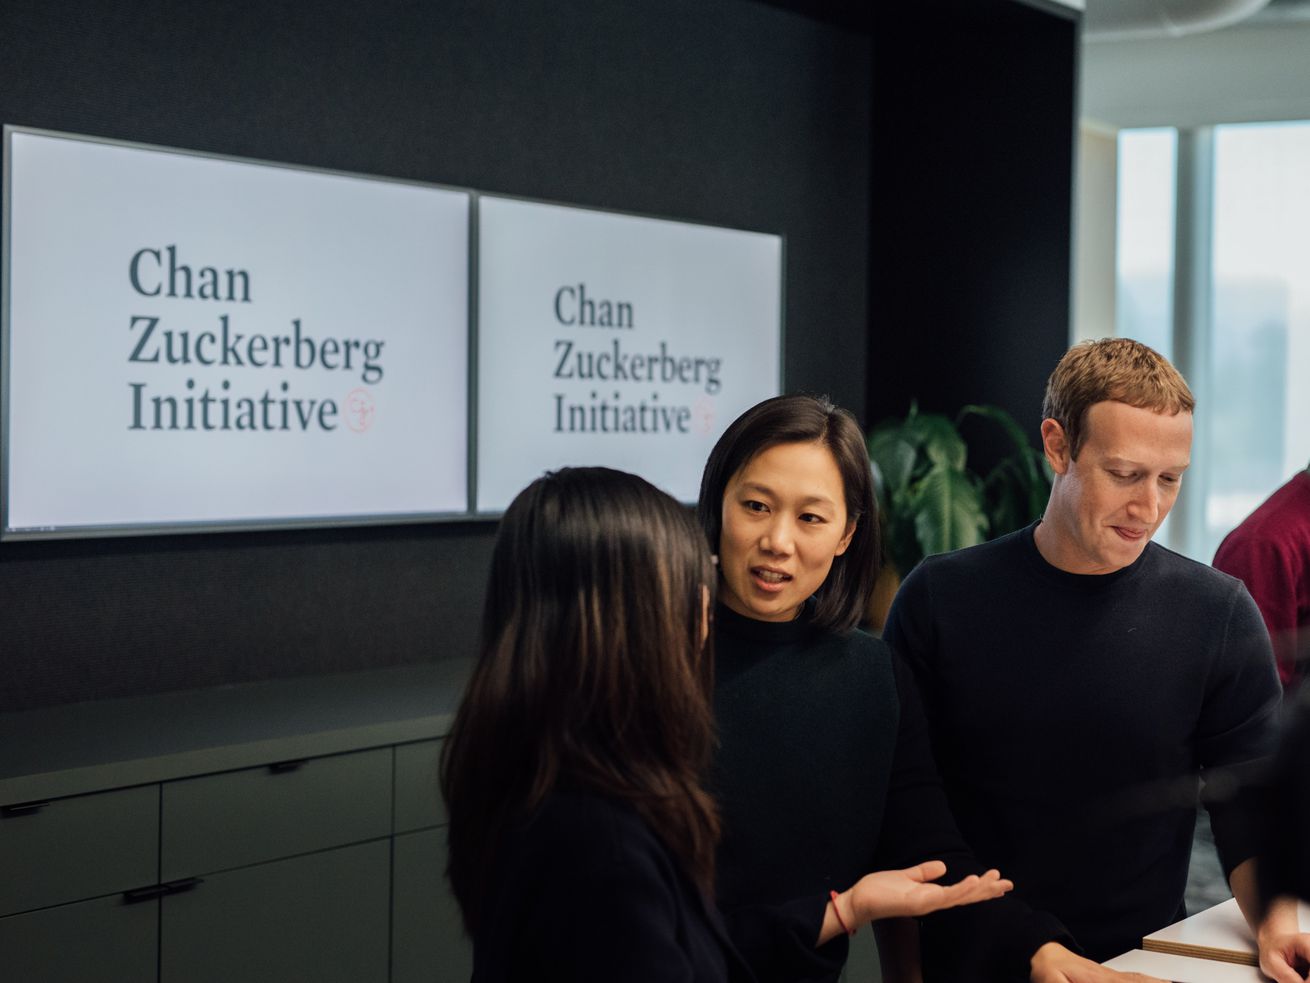 Priscilla Chan and Mark Zuckerberg speak with another person in front of a sign reading, “Chan Zuckerberg Initiative.”